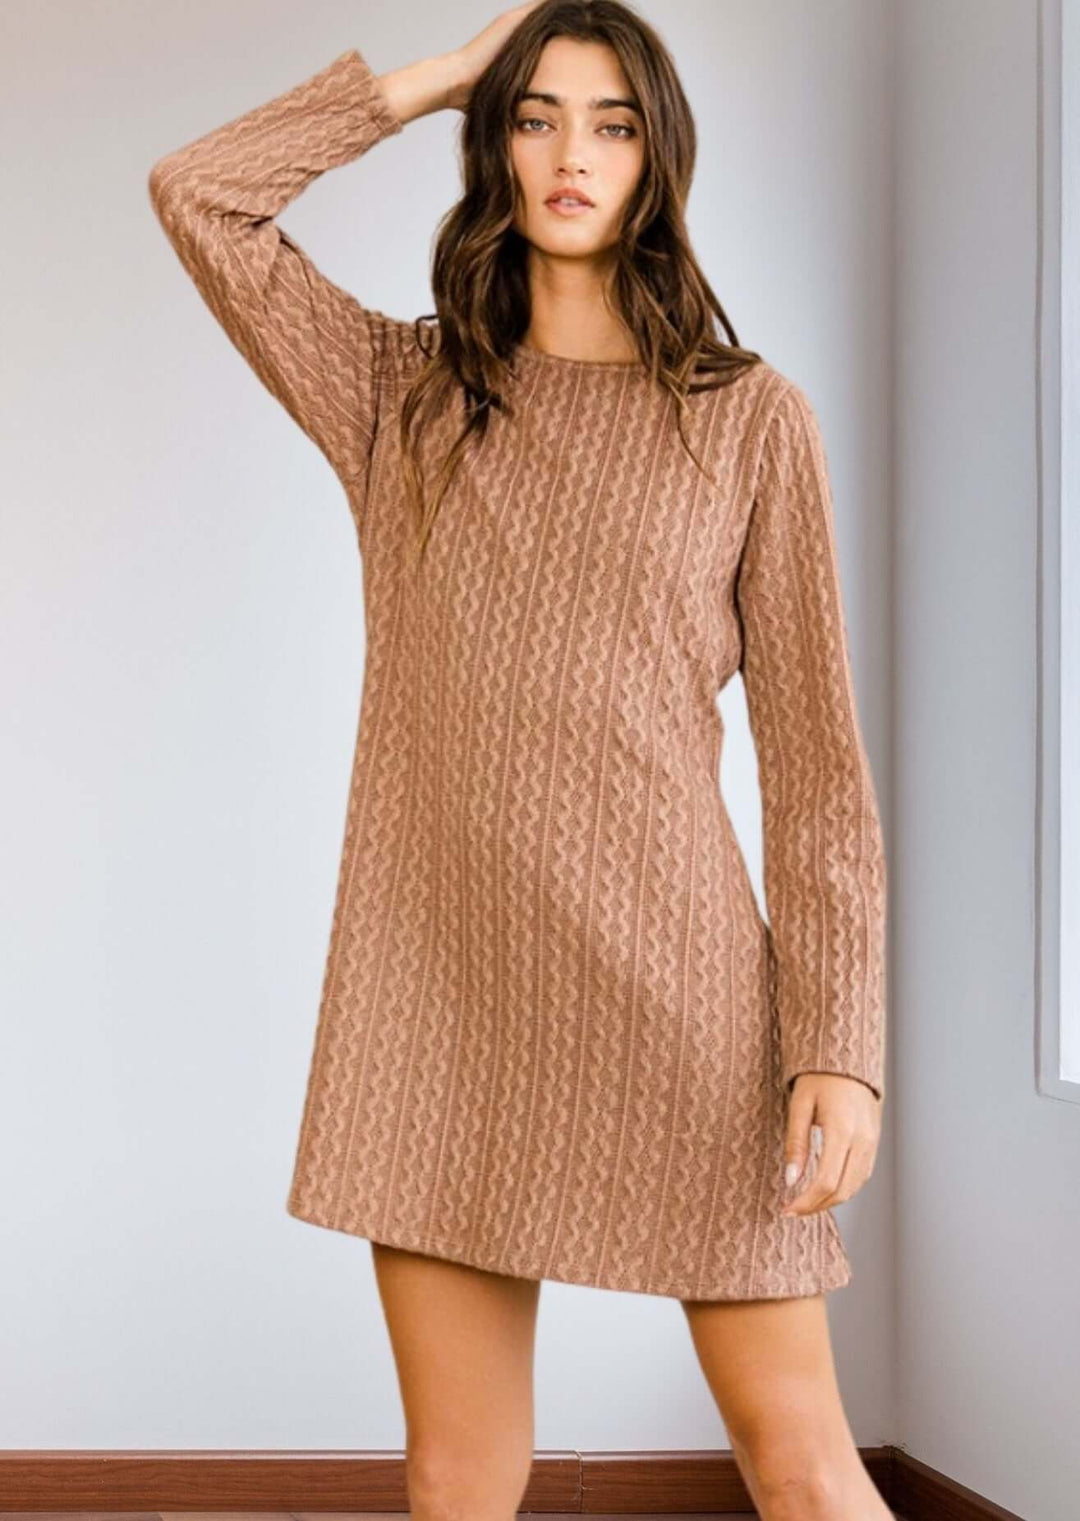 Bucket List Clothing Style# D4179 |  Women's Long Sleeve A-Line Sweater Tunic Dress in Camel | Classy Cozy Cool Women's Made in America Boutique